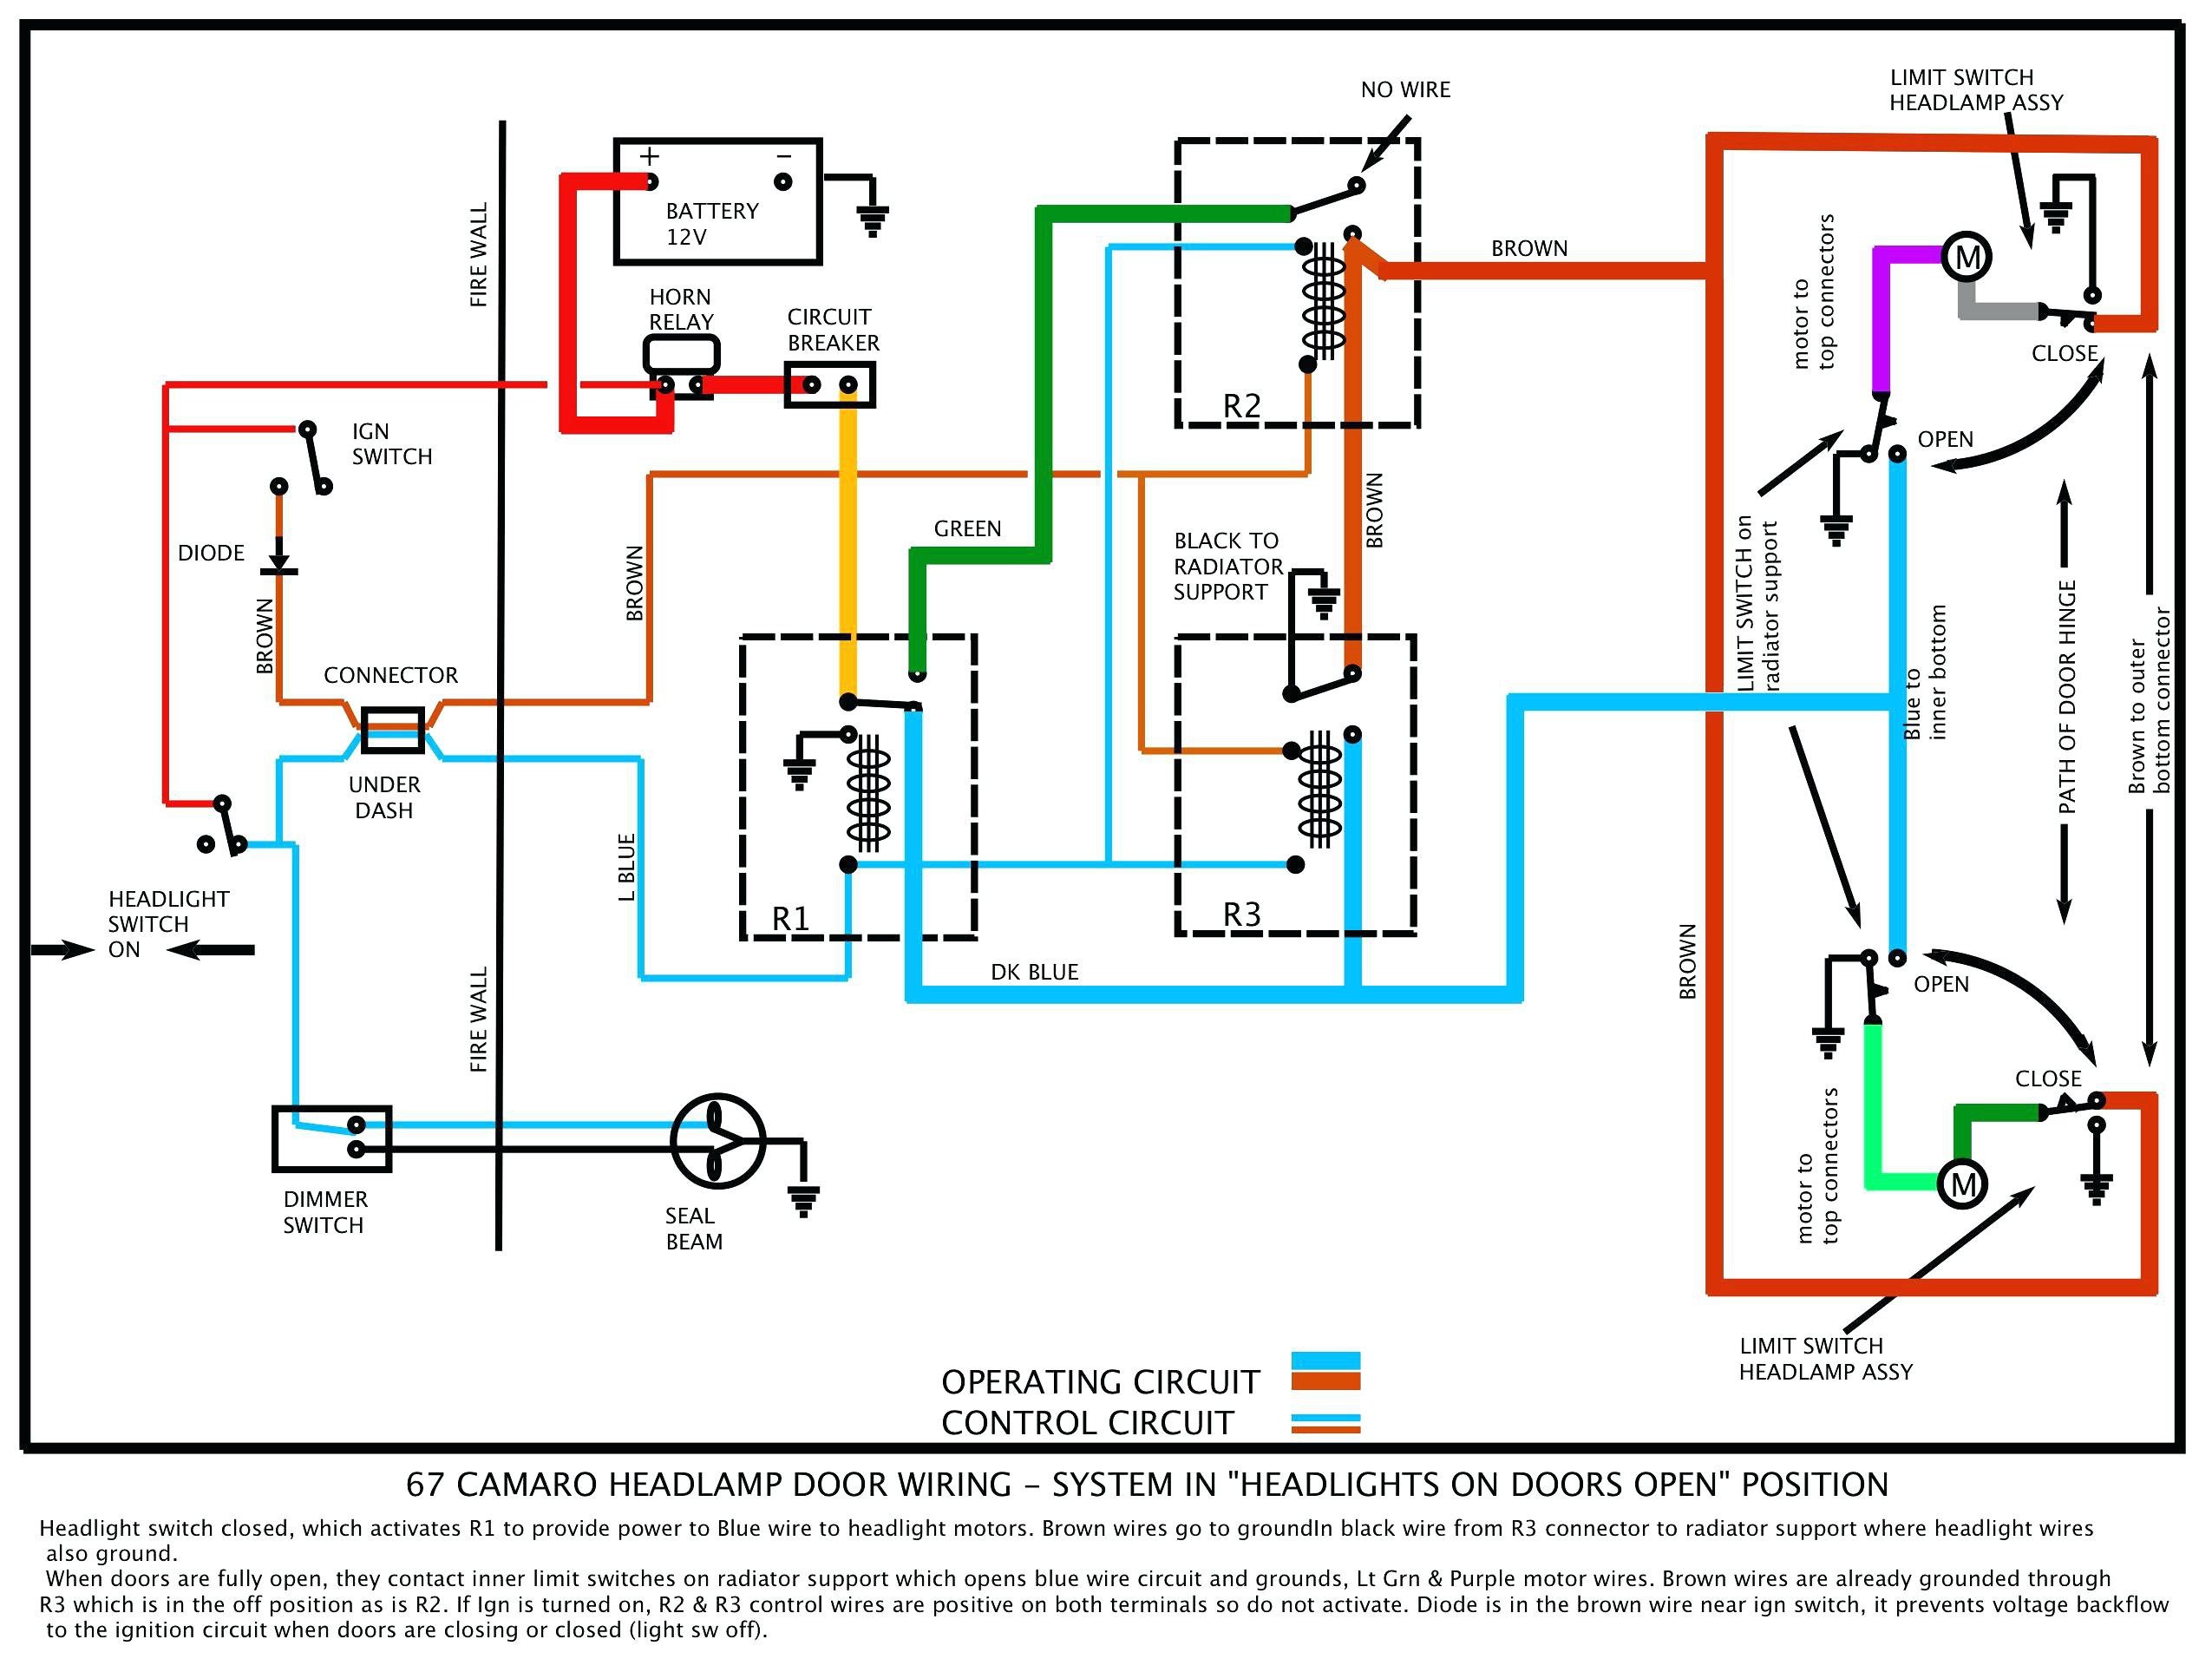 Lutron Led Dimmer Wiring Diagram from mainetreasurechest.com